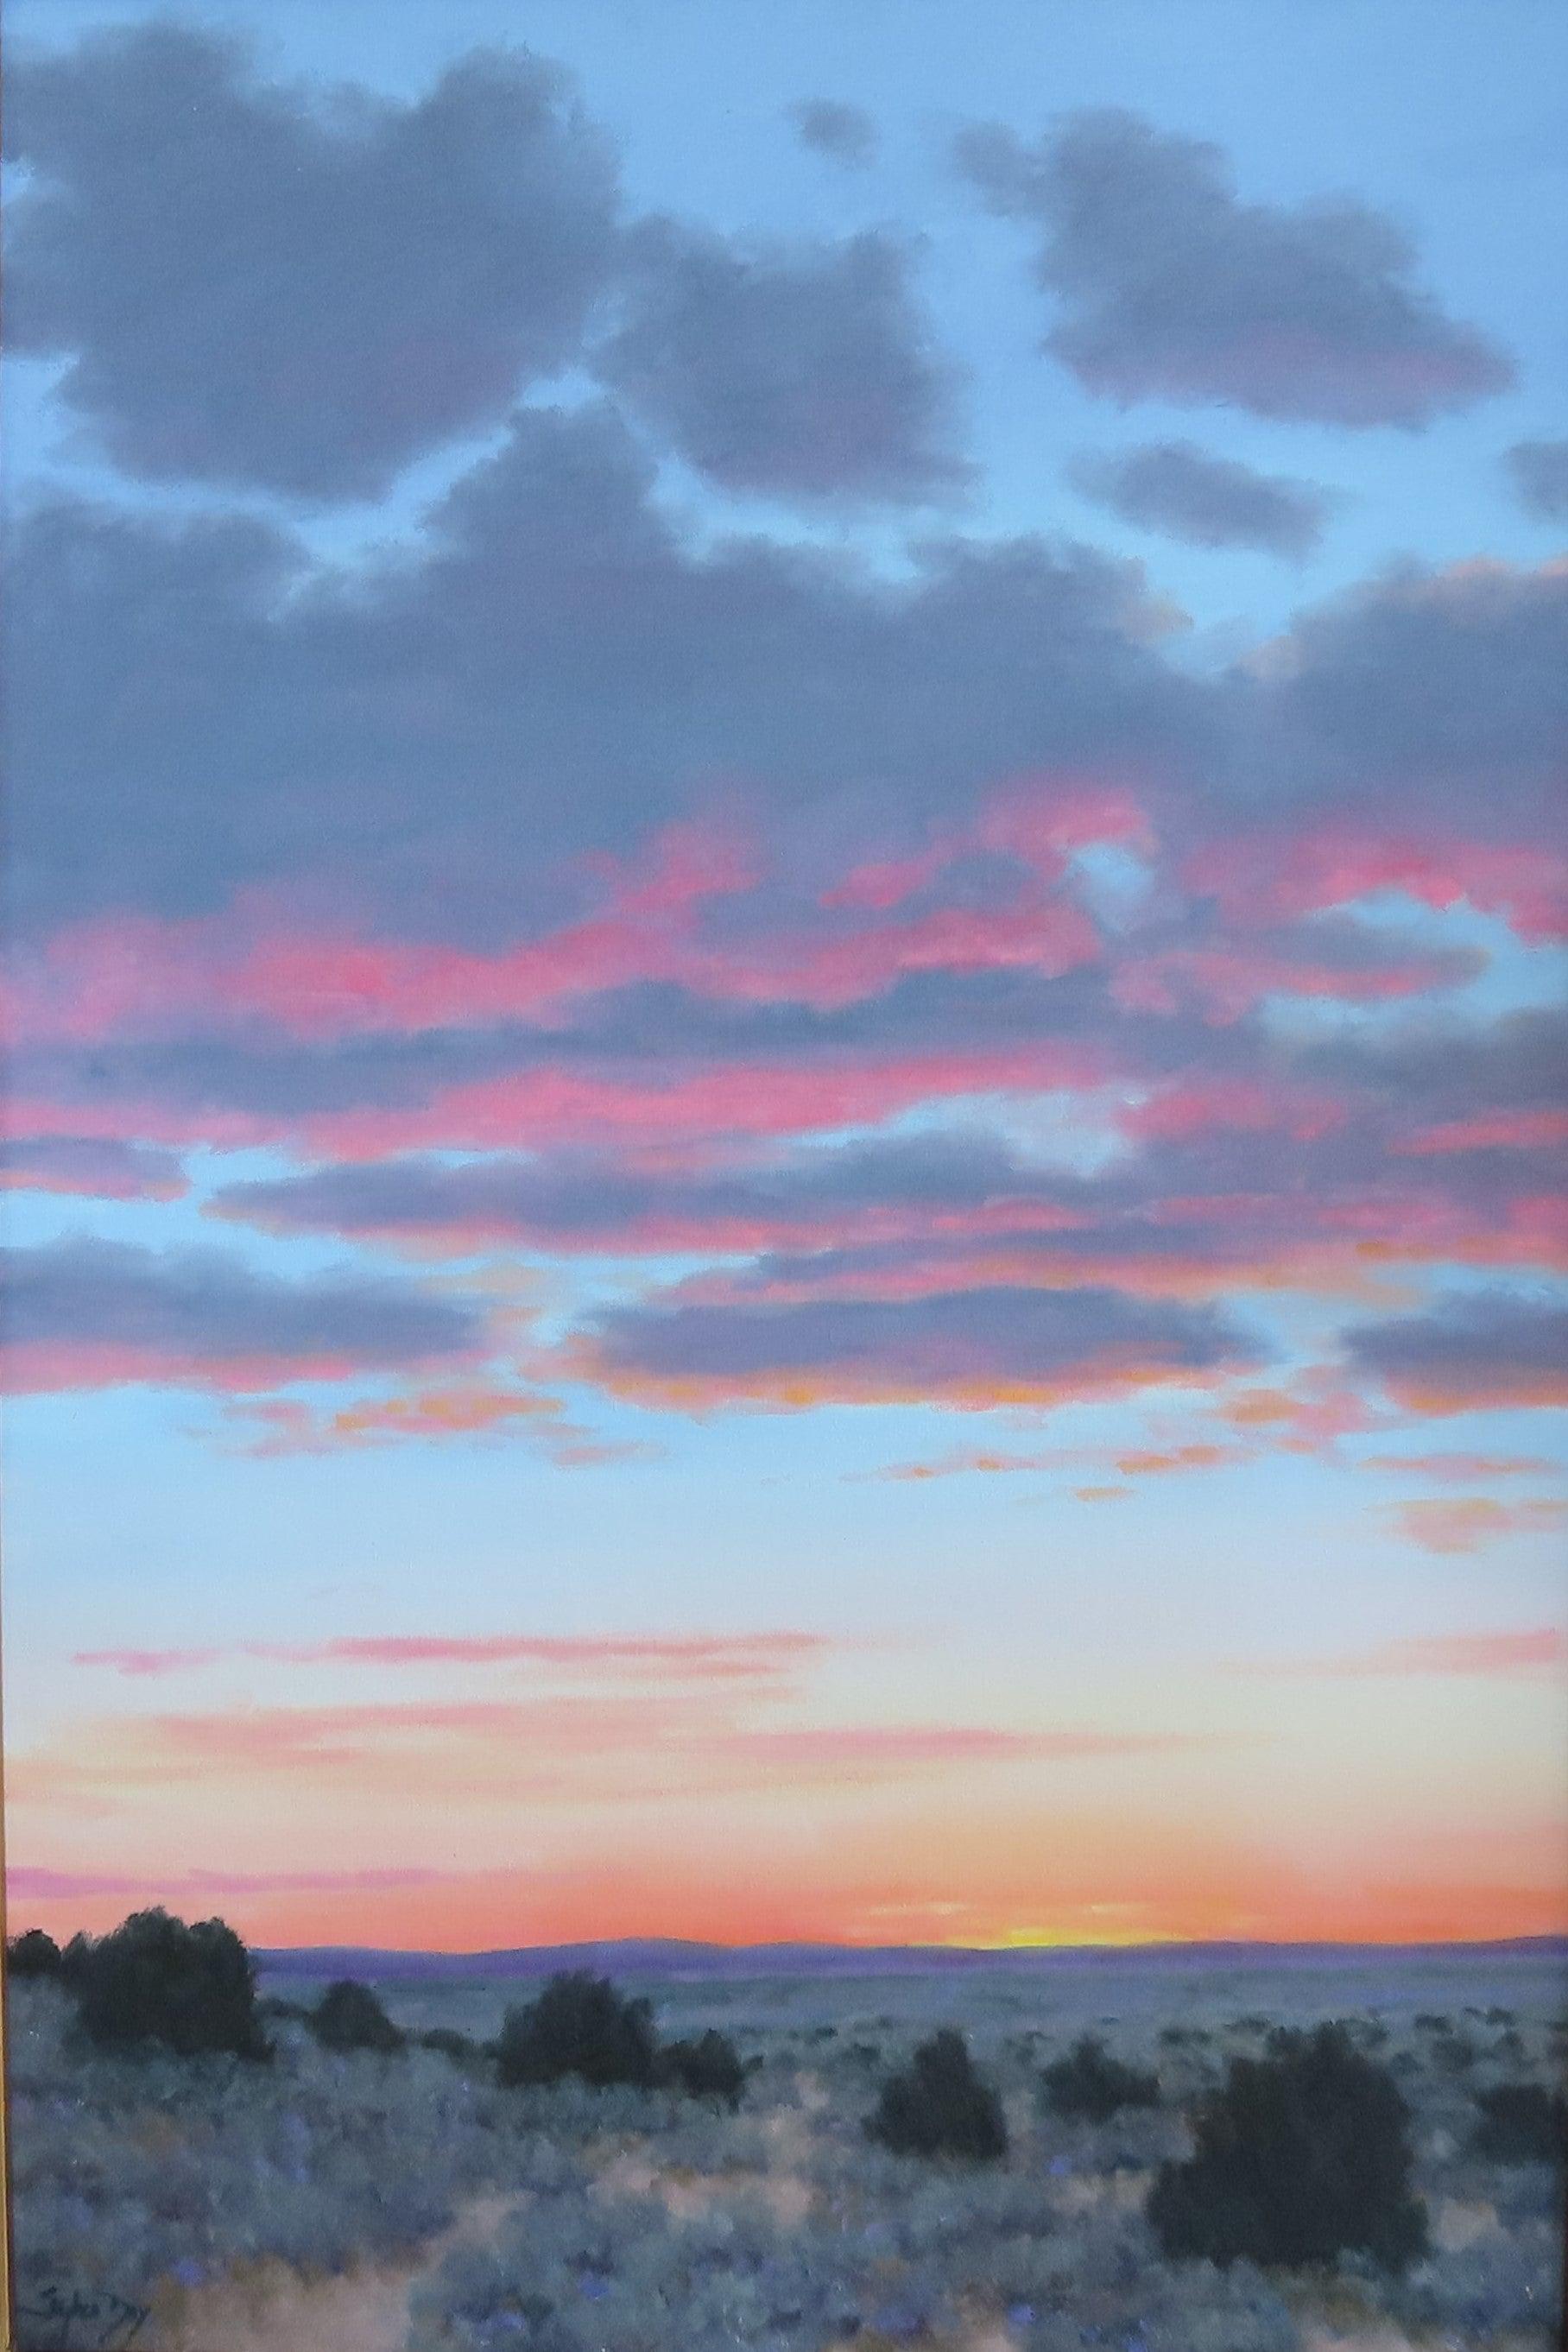 Sunset View Near Taos-painting-Stephen Day-Sorrel Sky Gallery